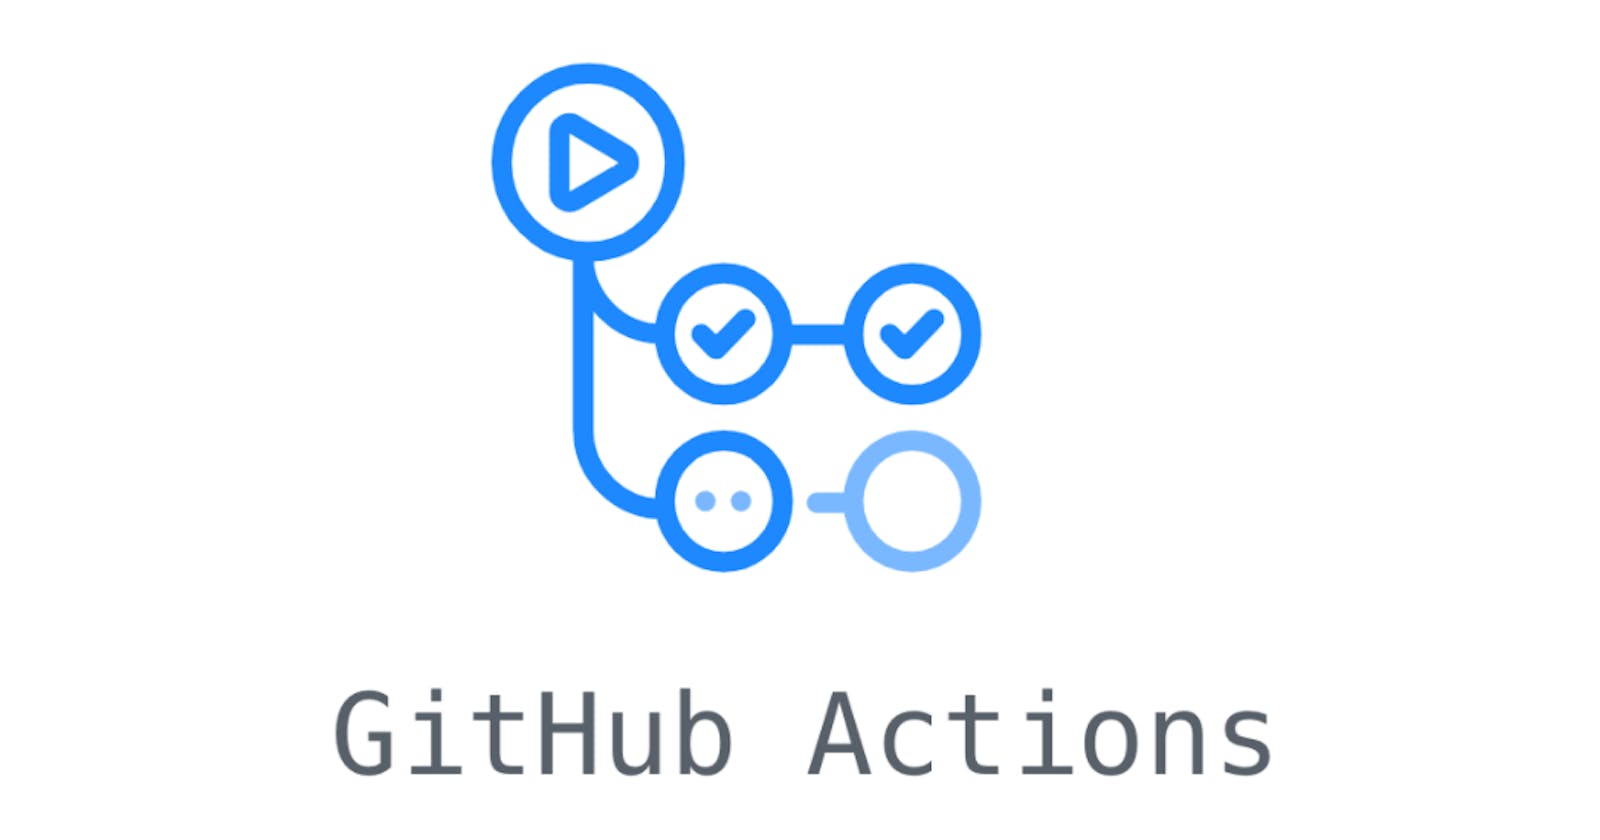 What is Github Actions? How does it simplify CI/CD?